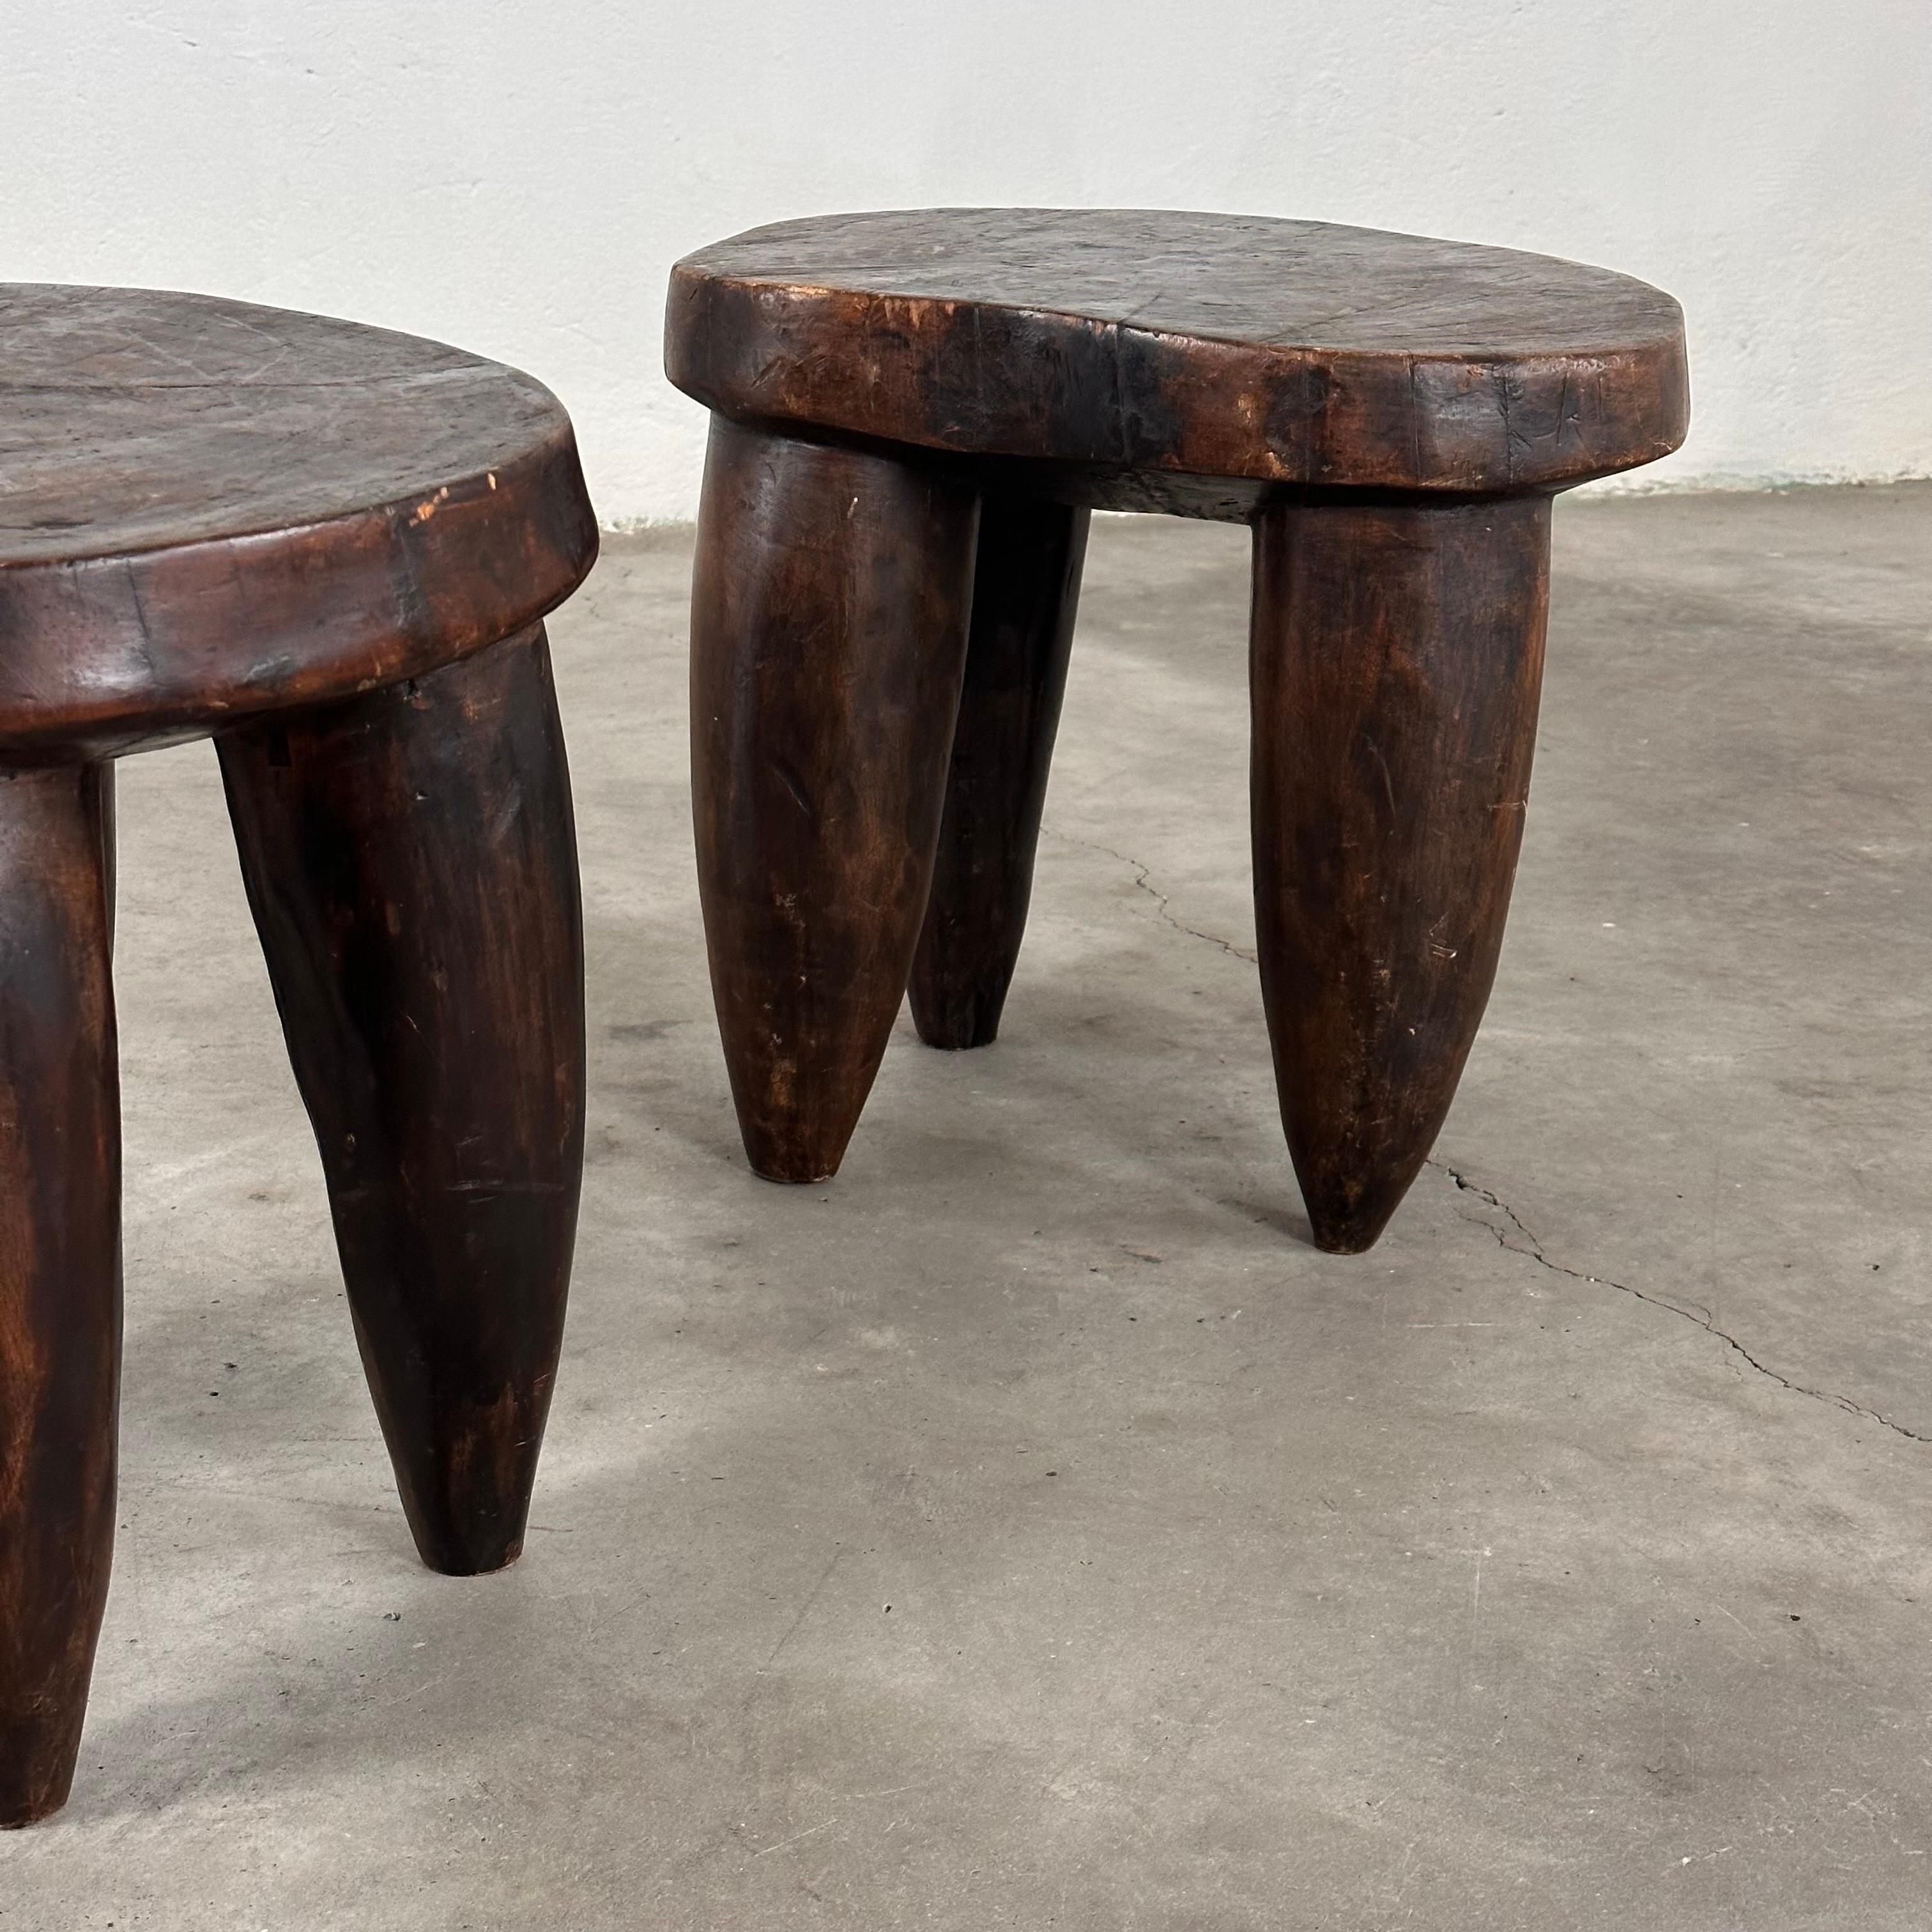 Rustic Rare Pair of Large African Senufo Stools, Late 20th Century, Highly Decorative For Sale